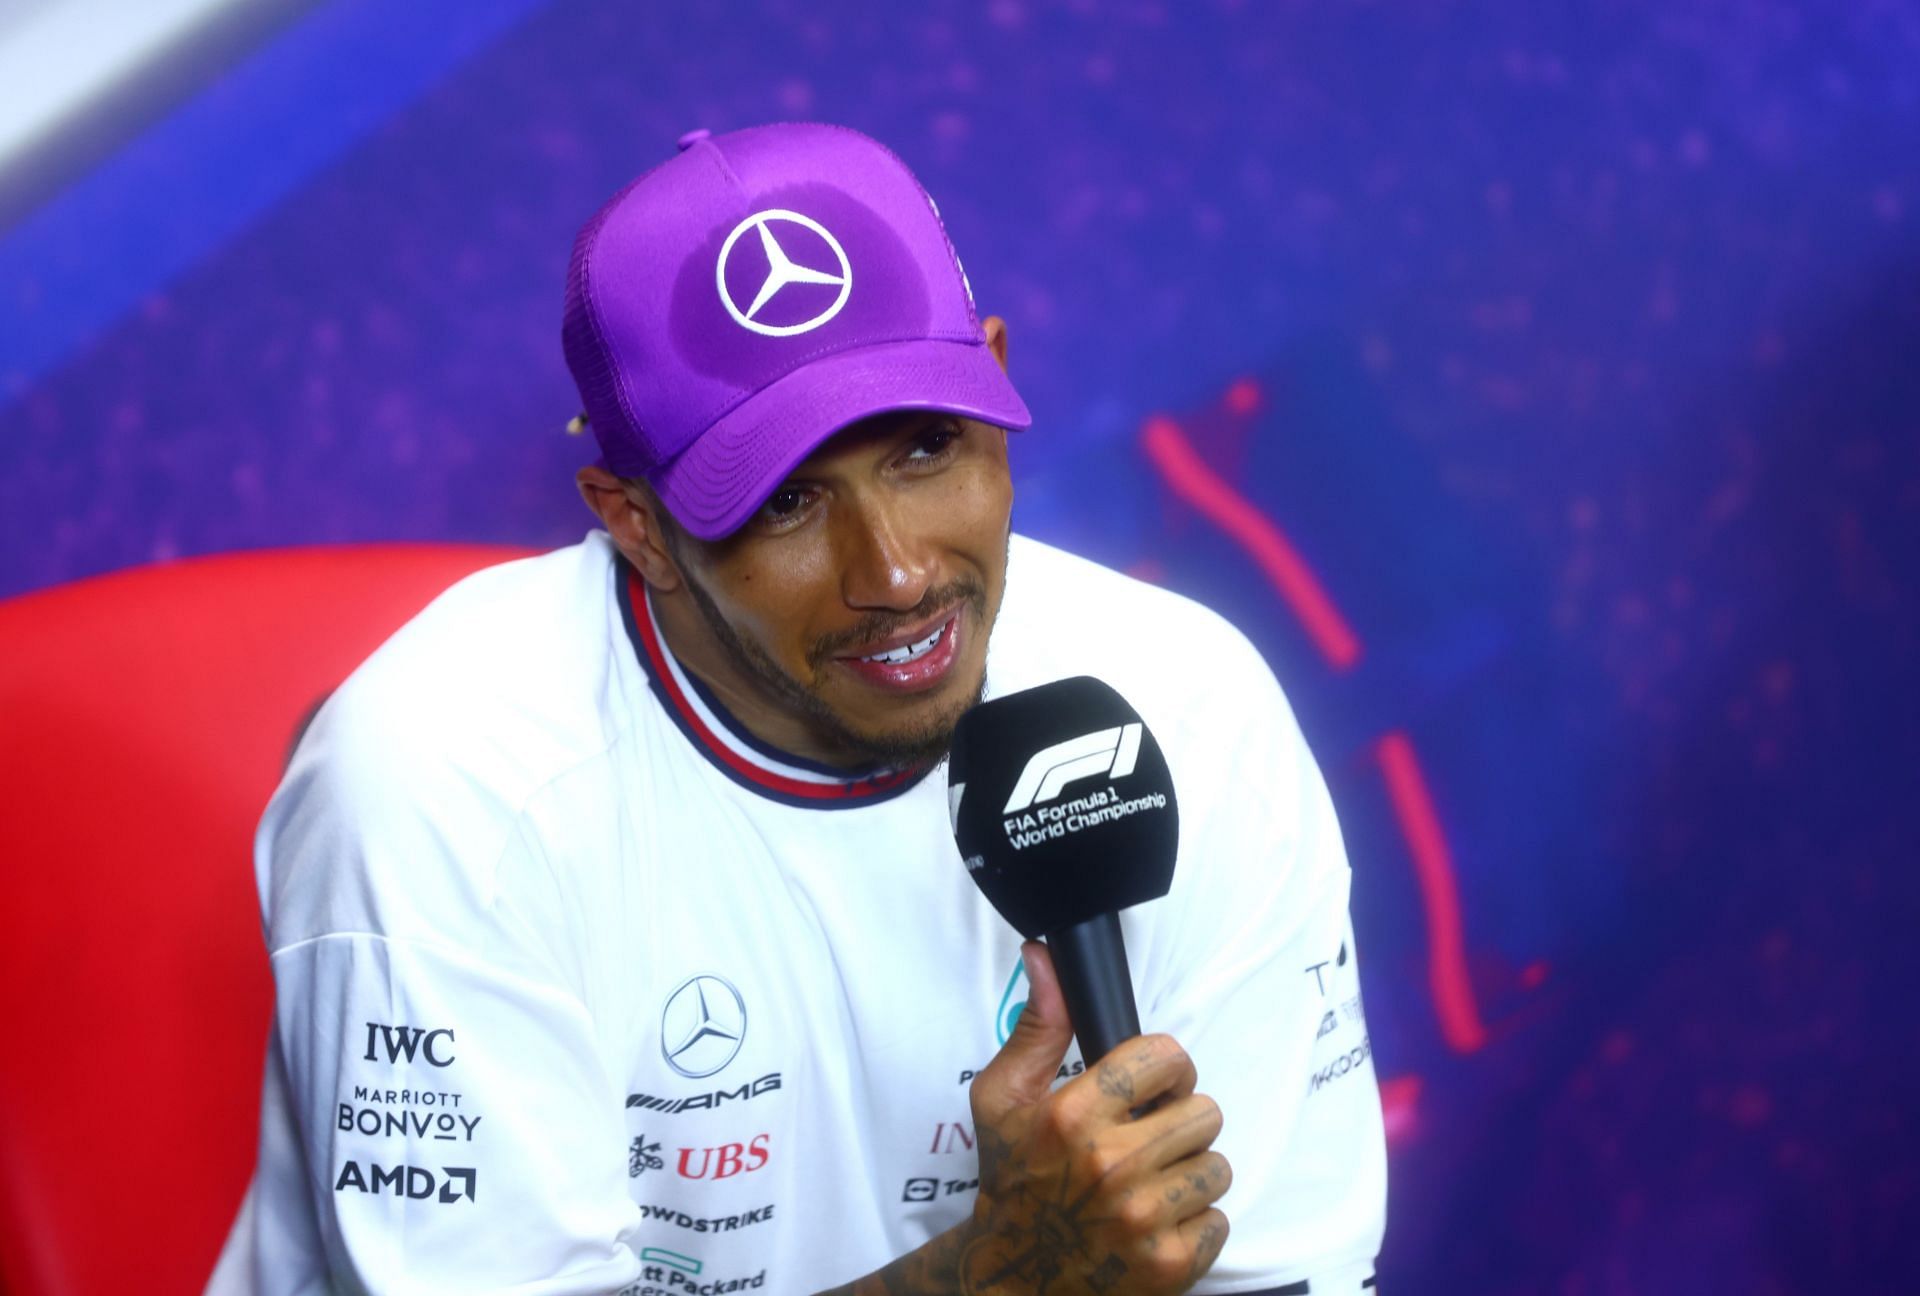 Lewis Hamilton attends the French GP press conference. (Photo by Dan Istitene/Getty Images)